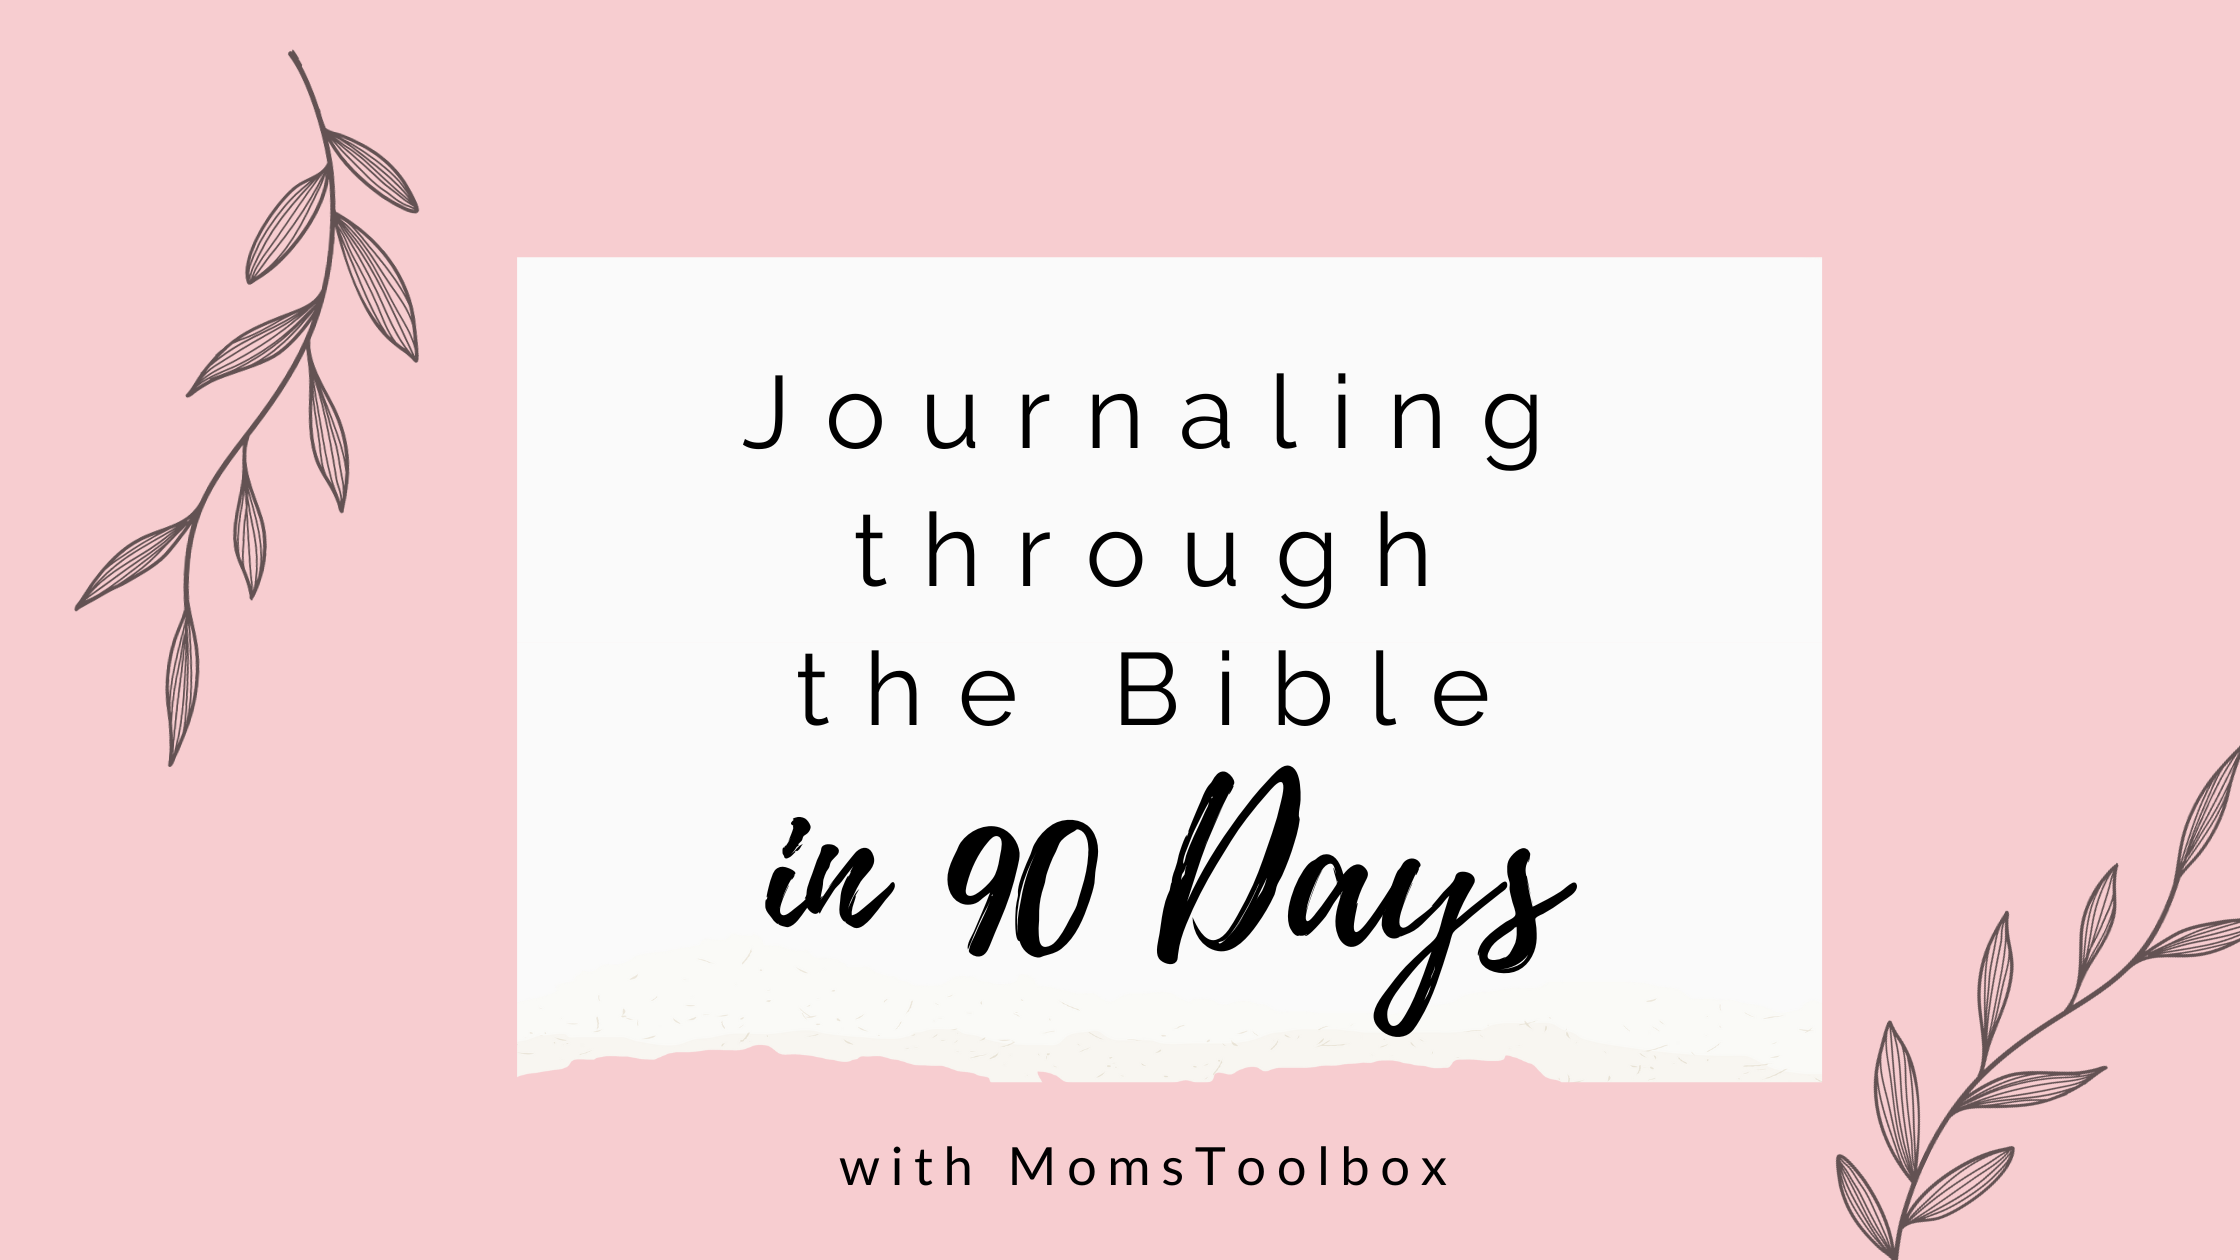 Journaling through the Bible in 90 days: Day 4